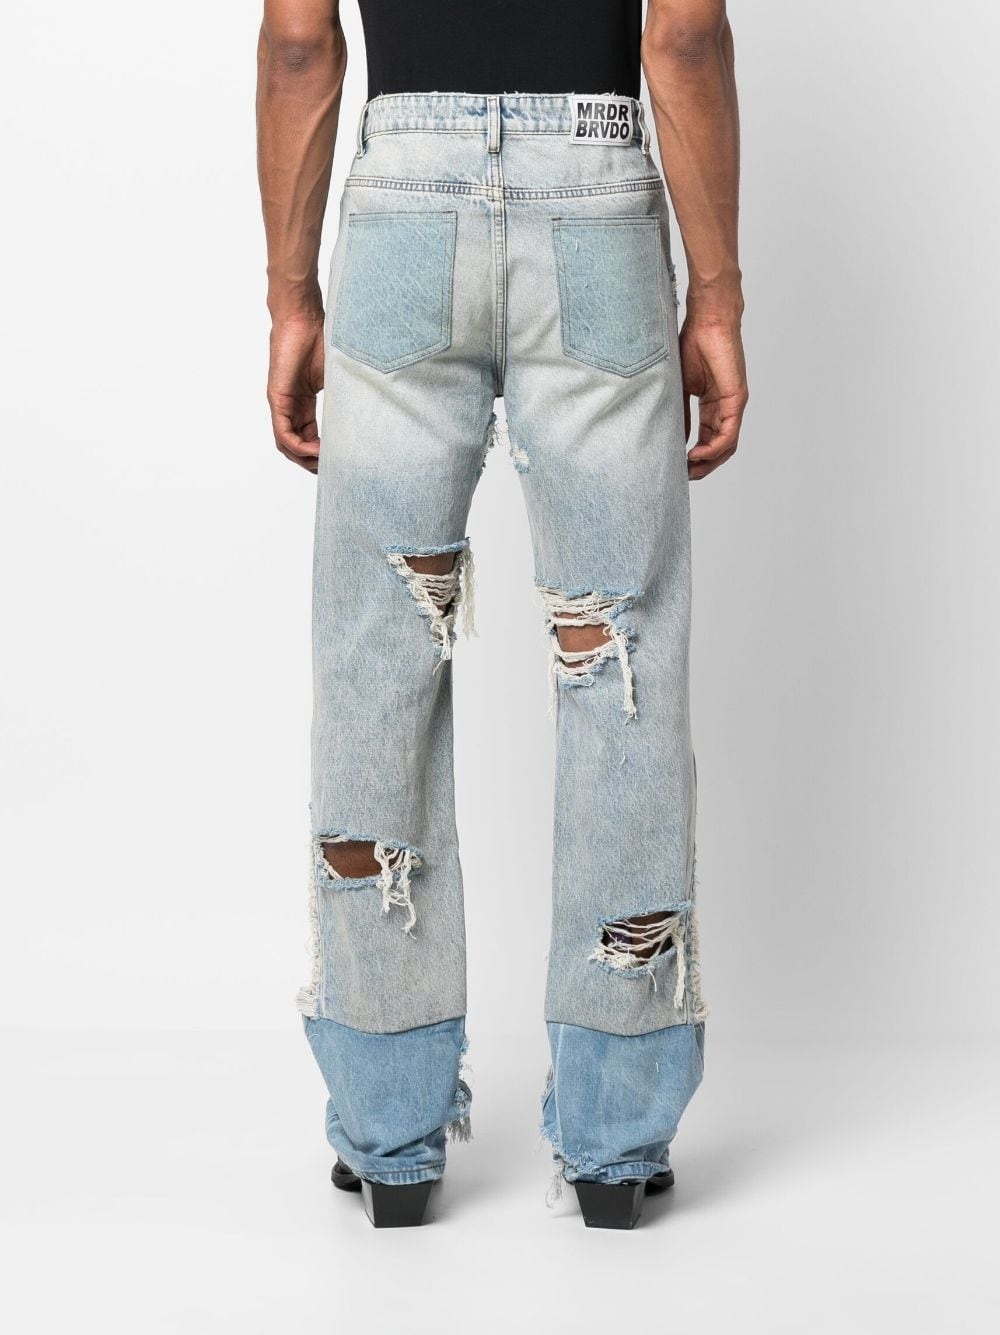 Gnarly distressed jeans - 4